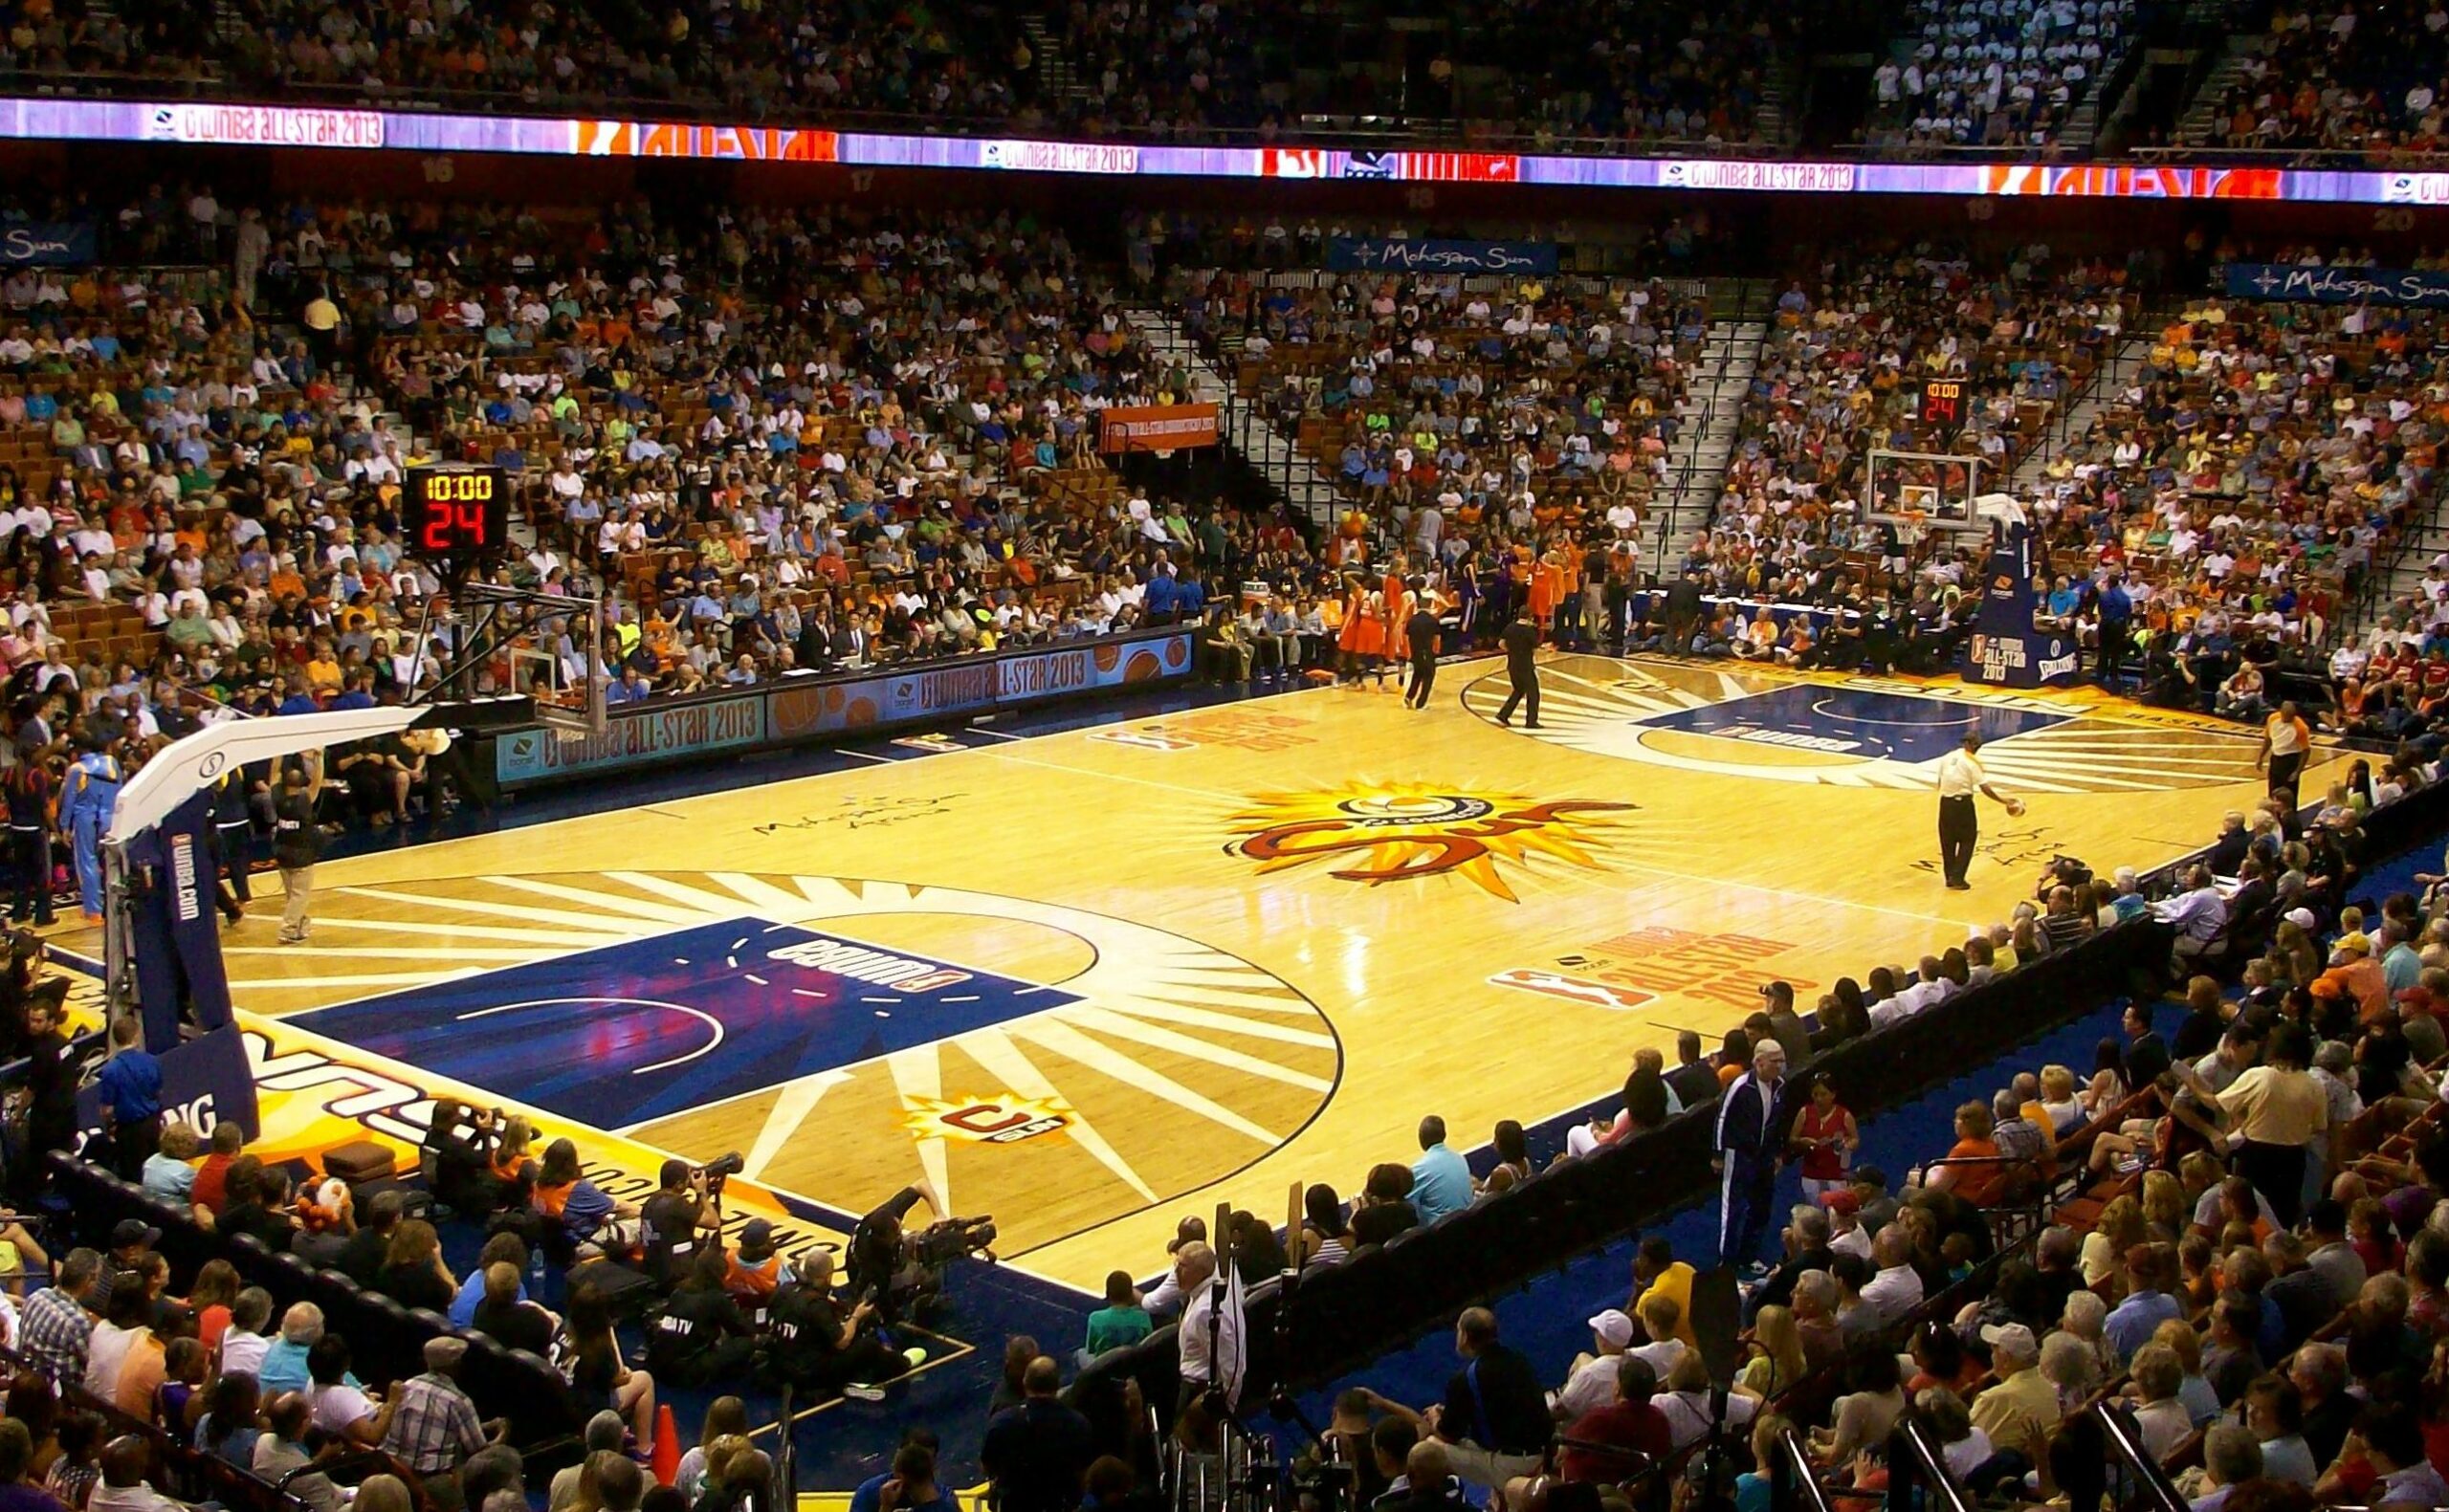 The West defeats the East in the 2013 WNBA All-Star game, 102-98